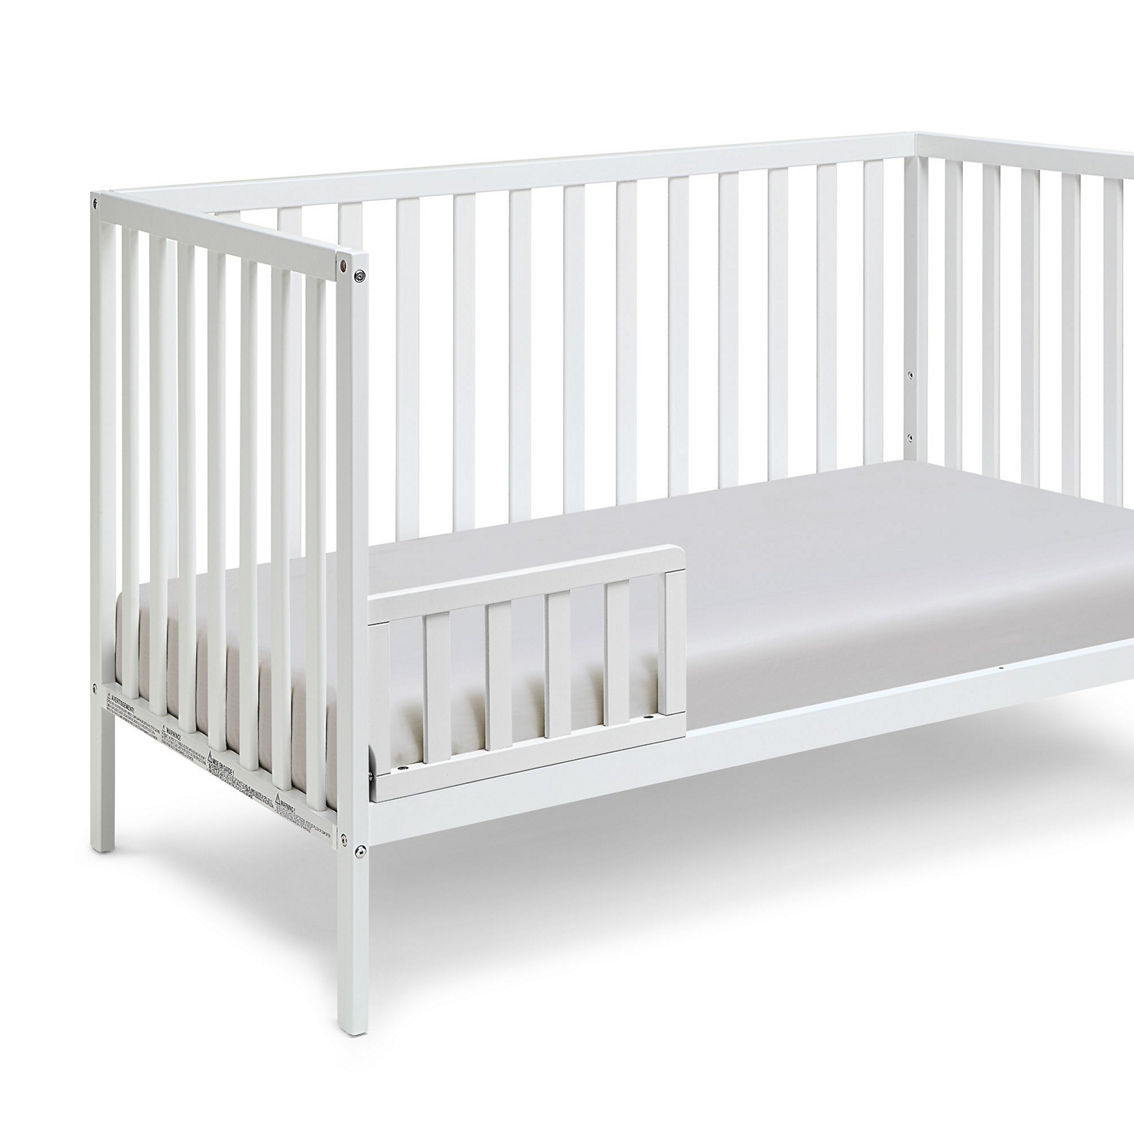 Suite Bebe Palmer 3-in-1 Convertible Island Crib White - Image 4 of 5